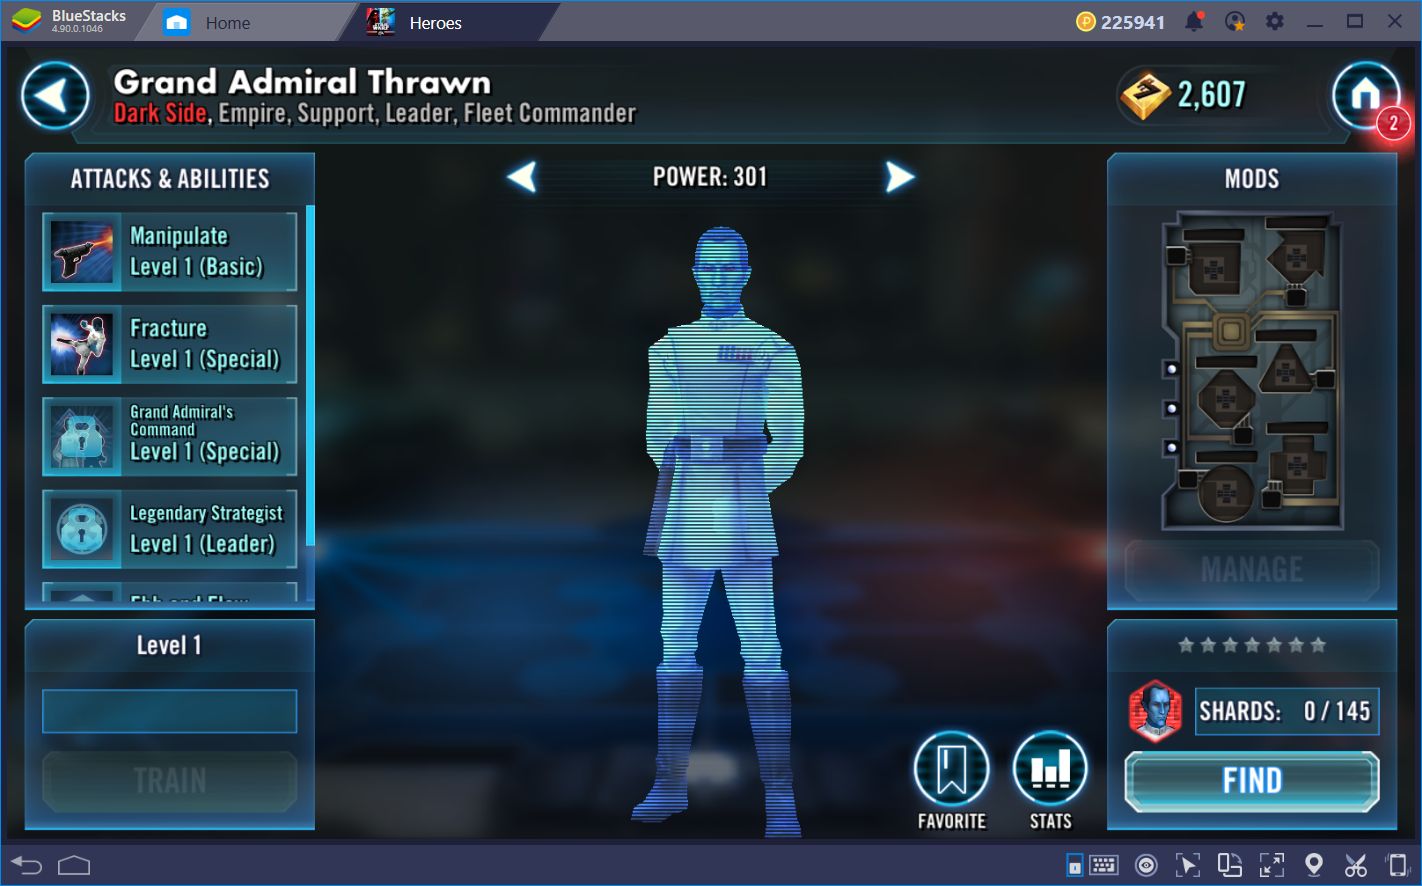 How to Unlock Awesome Characters in Star Wars: Galaxy of Heroes